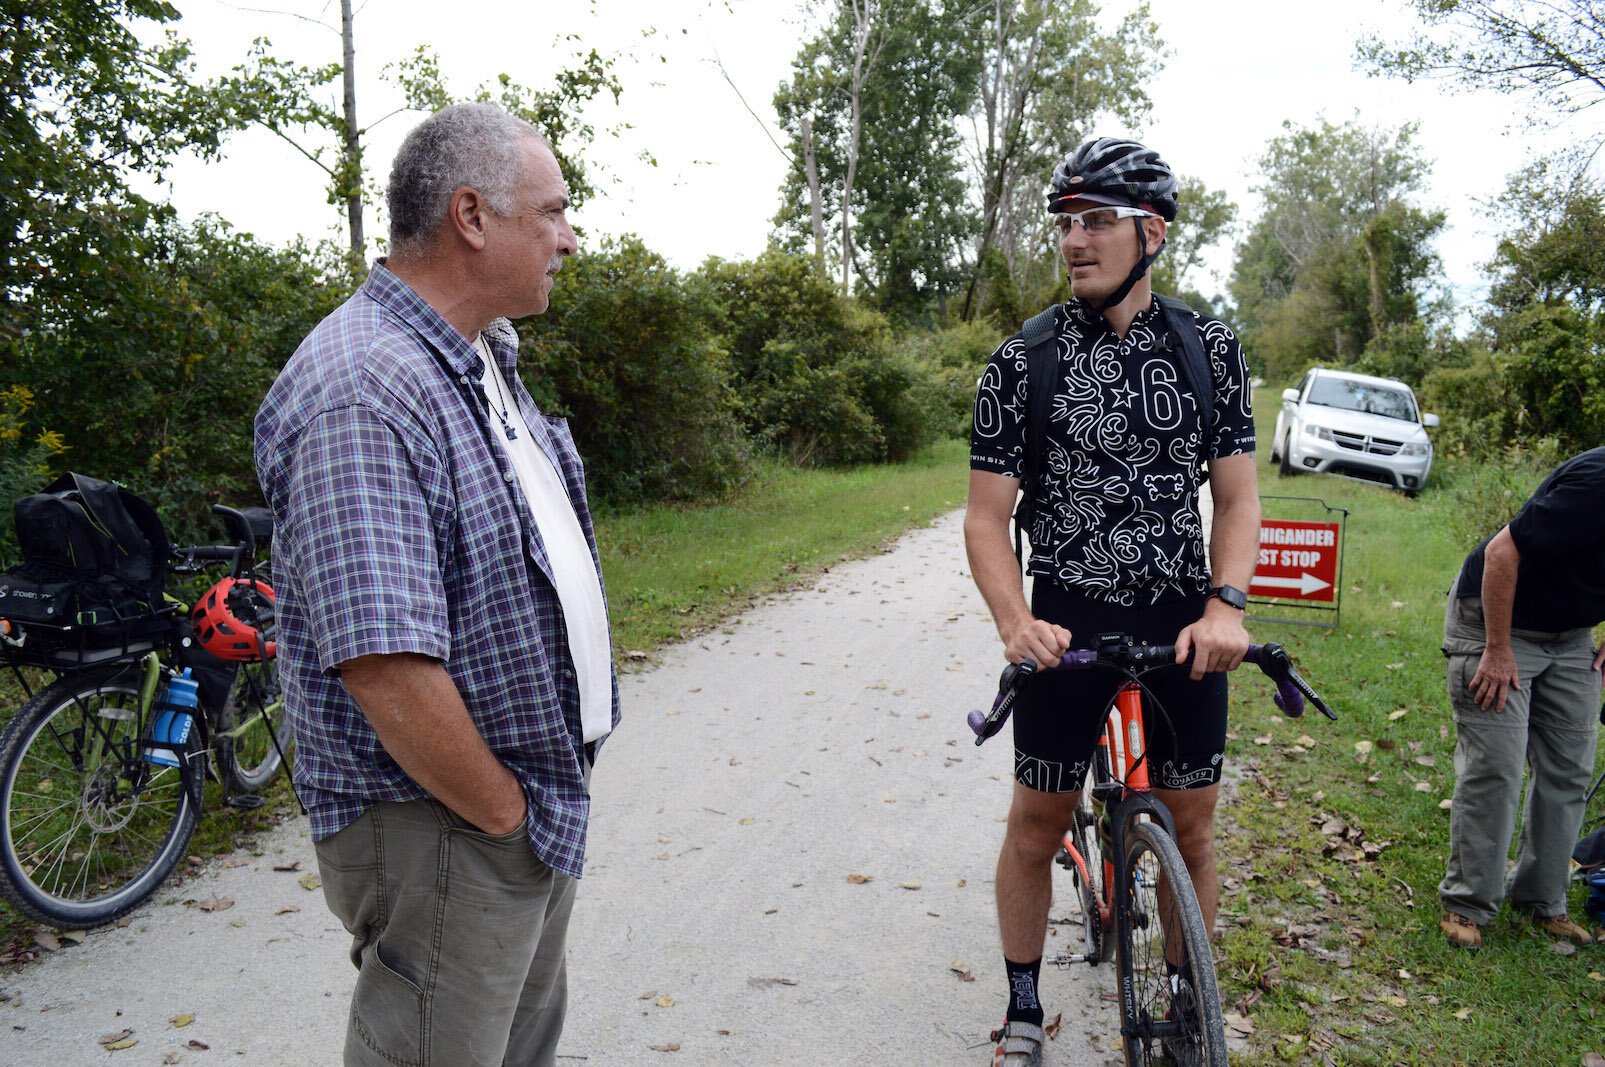 Jeff Green (left), of the Friends of the Kal-Haven Trail, chats with DNR manager Matt Metzger at a bike event on the Kal-Haven last September.